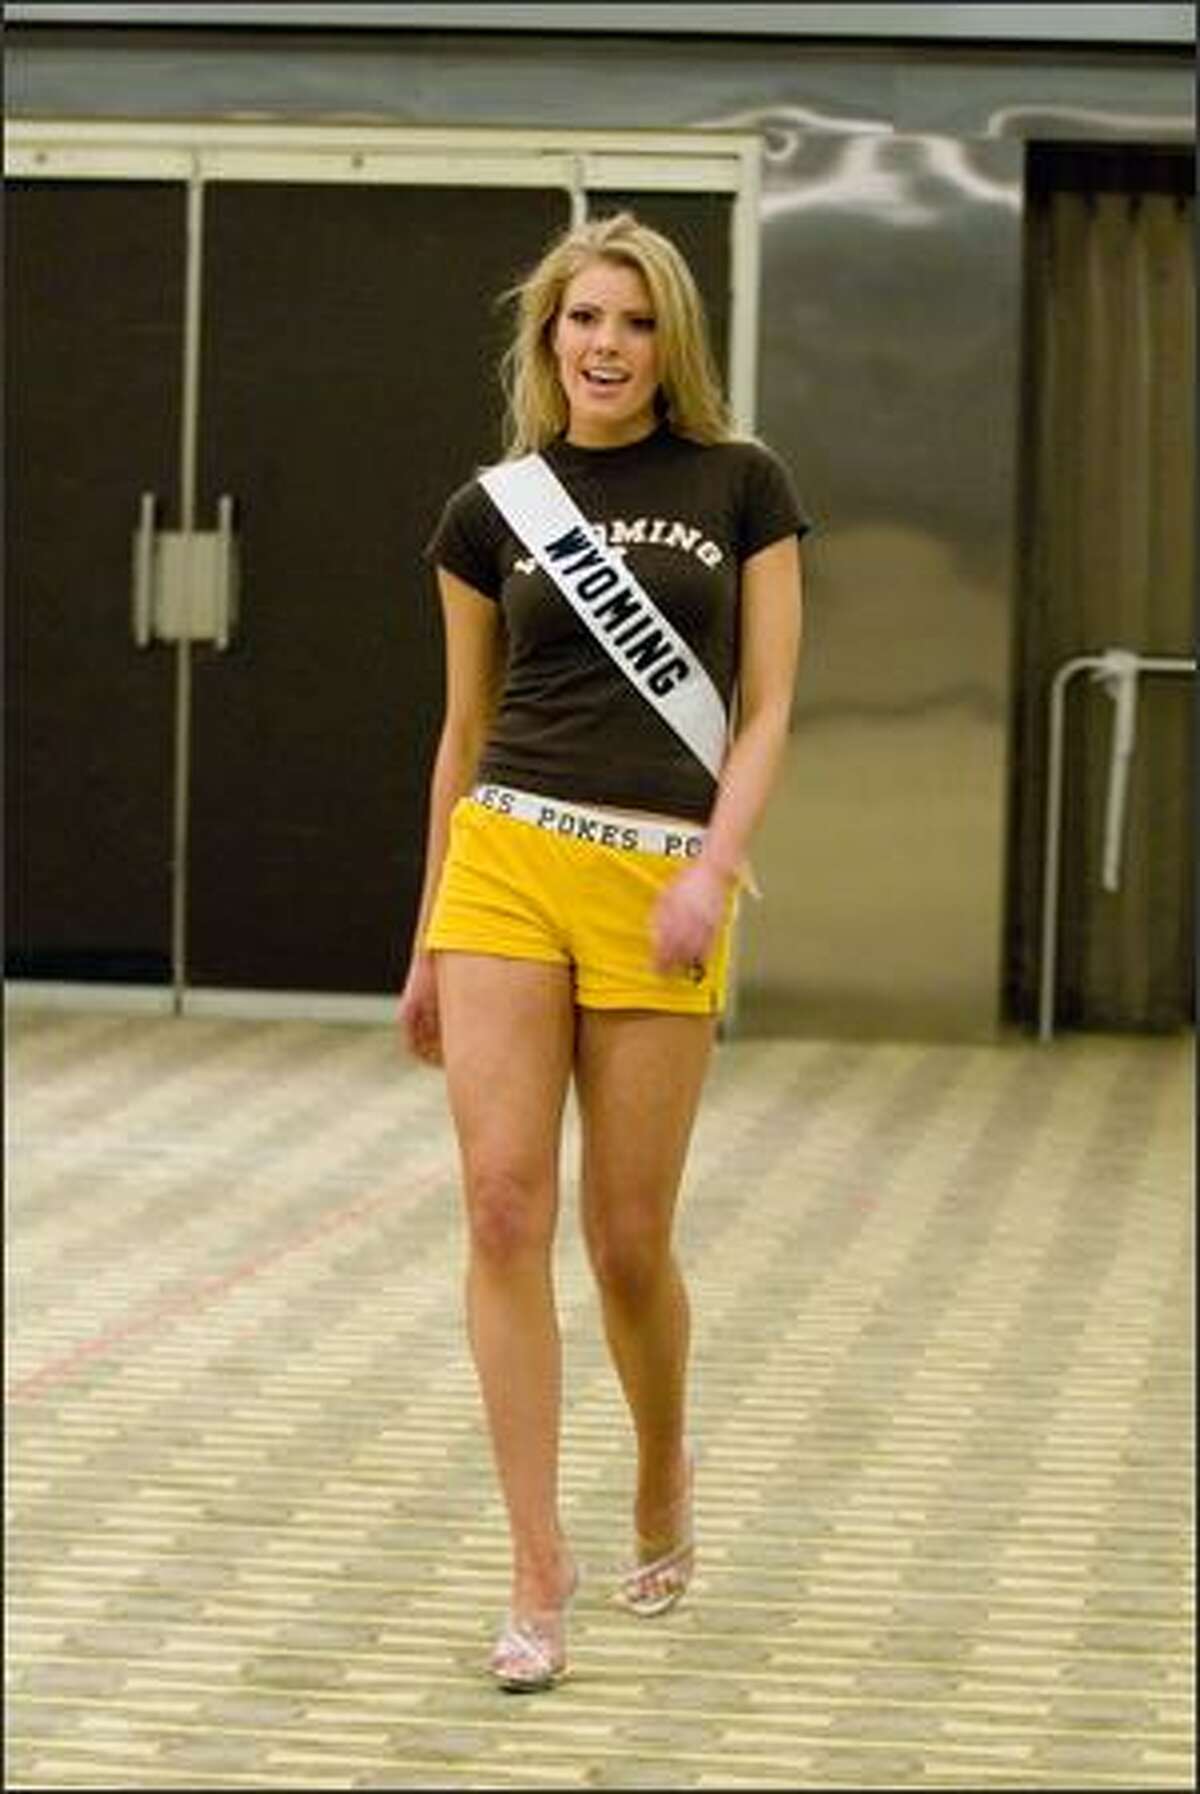 Robyn Johnson, Miss Wyoming USA 2007, rehearses for the Miss USA 2007 competition at the Wilshire Grand Hotel on March 11.